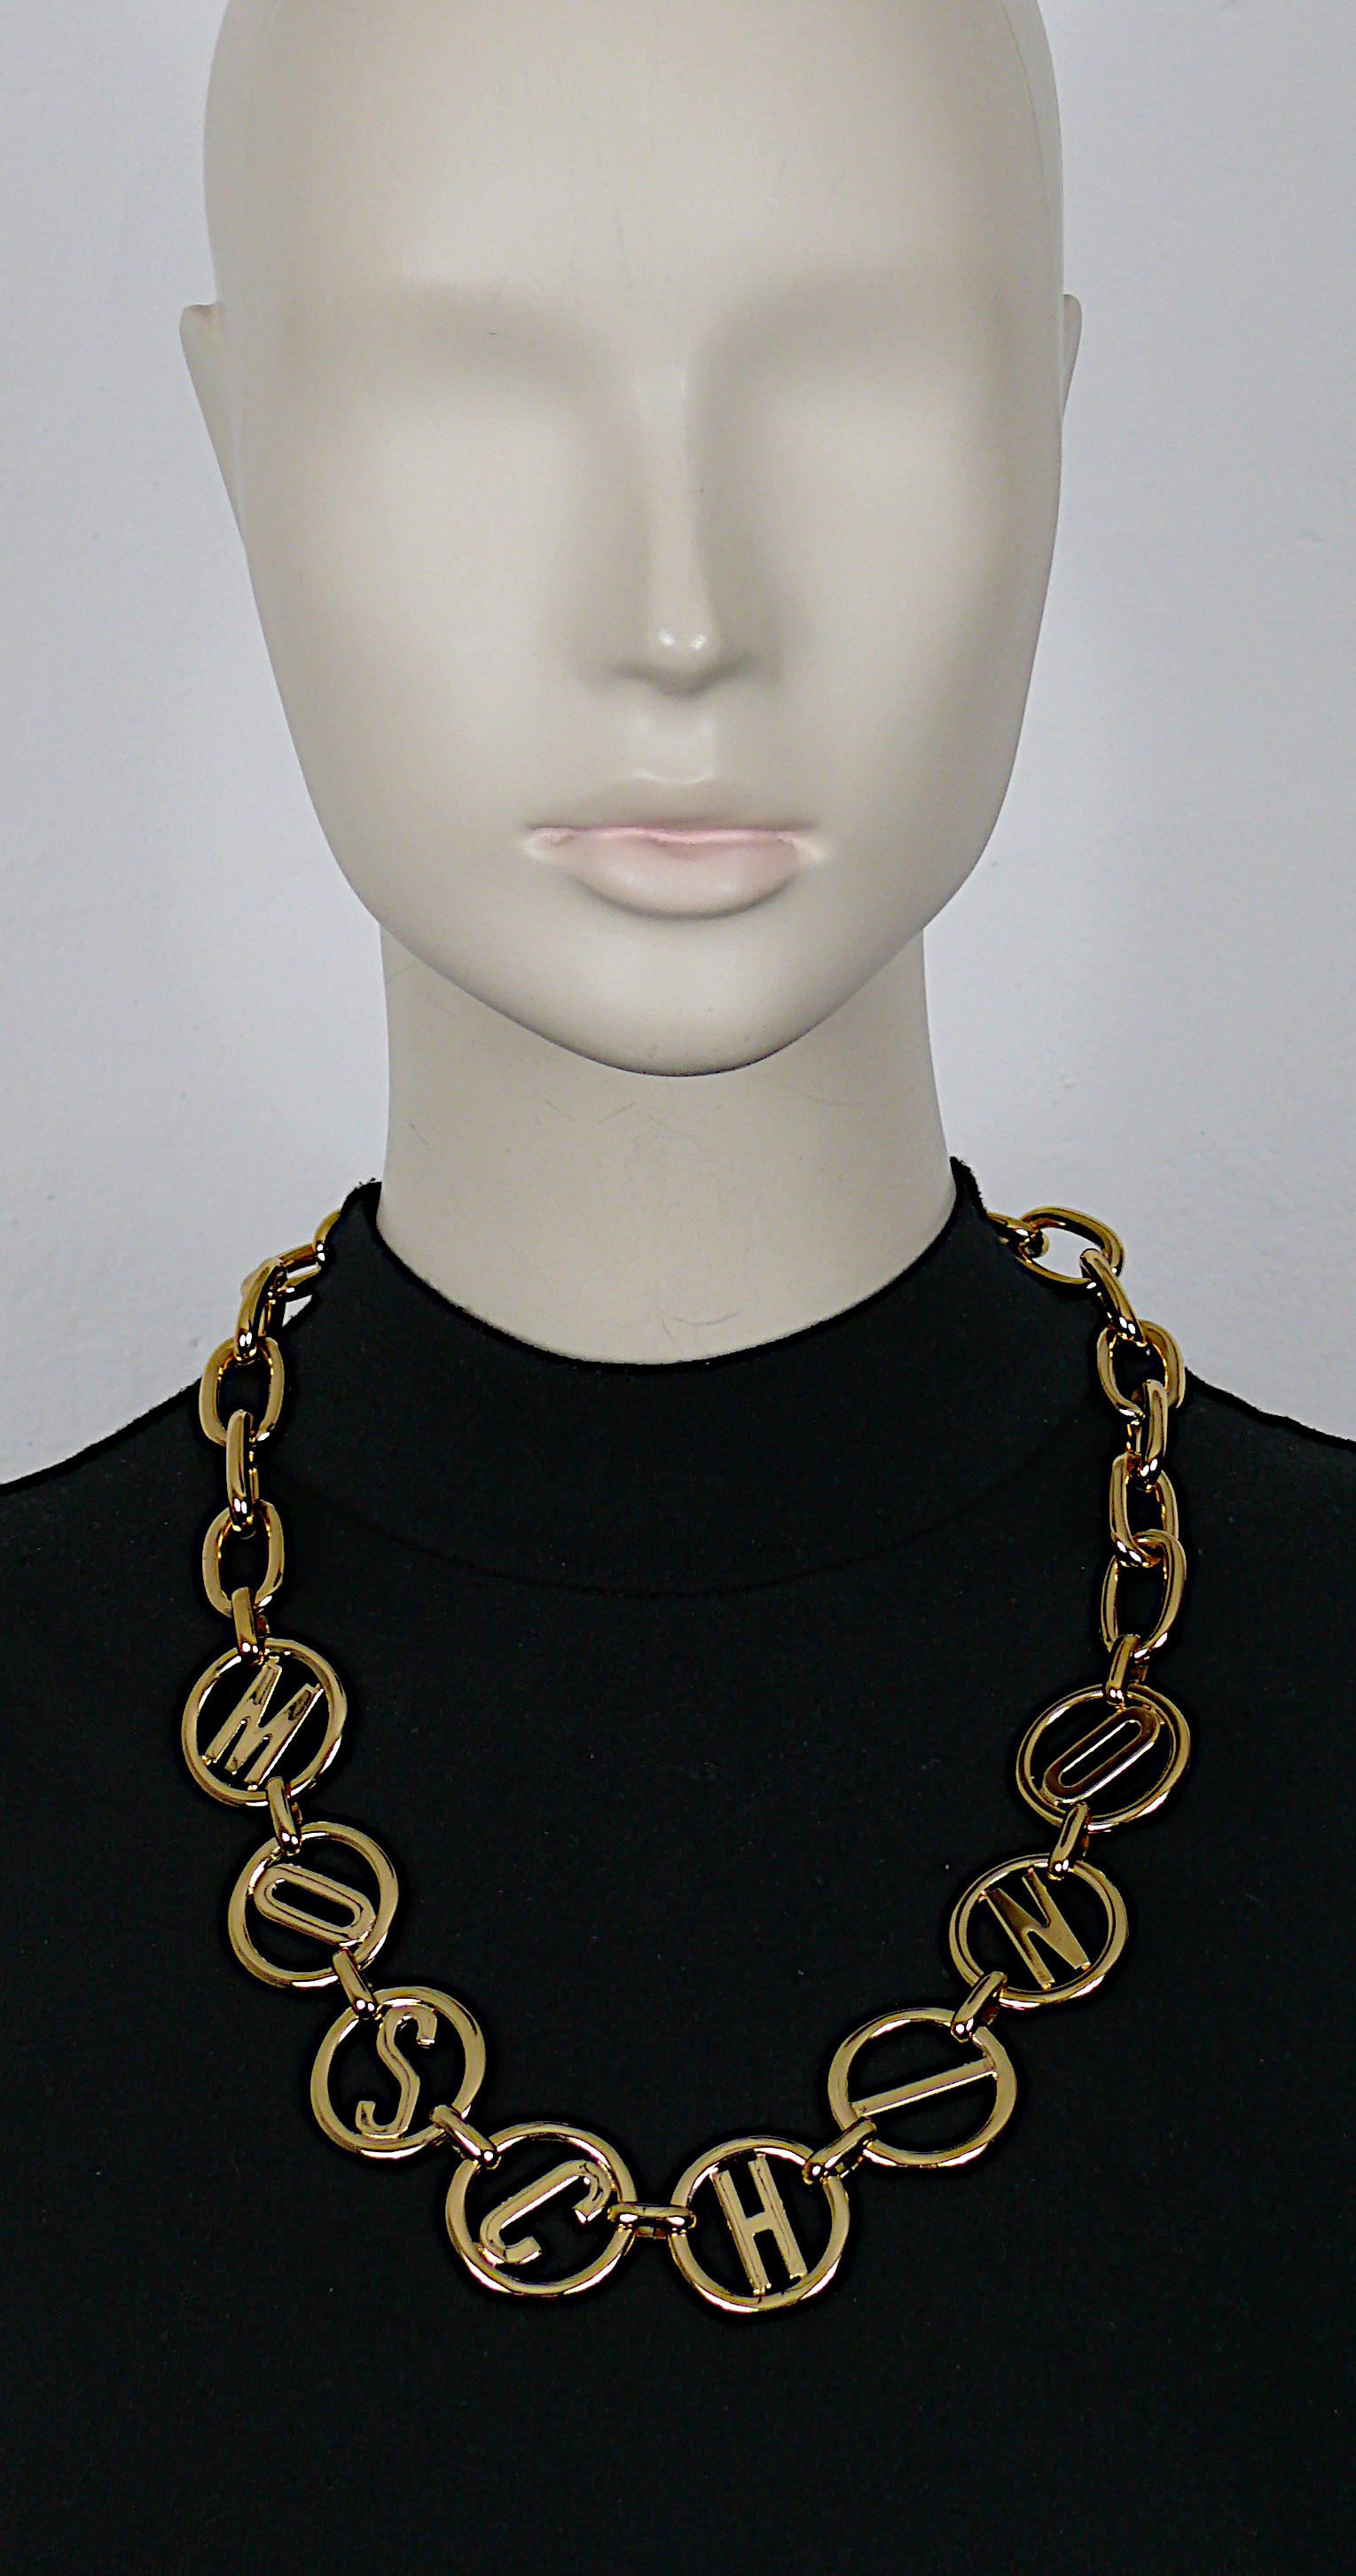 MOSCHINO gold tone chain necklace featuring eight round M O S C H I N O links.

Lobster clasp closure.

Embossed MOSCHINO Made in Italy.

Indicative measurement : length approx. 60.5 cm (23.82 inches) / diameter of the round links approx. 3 cm (1.18